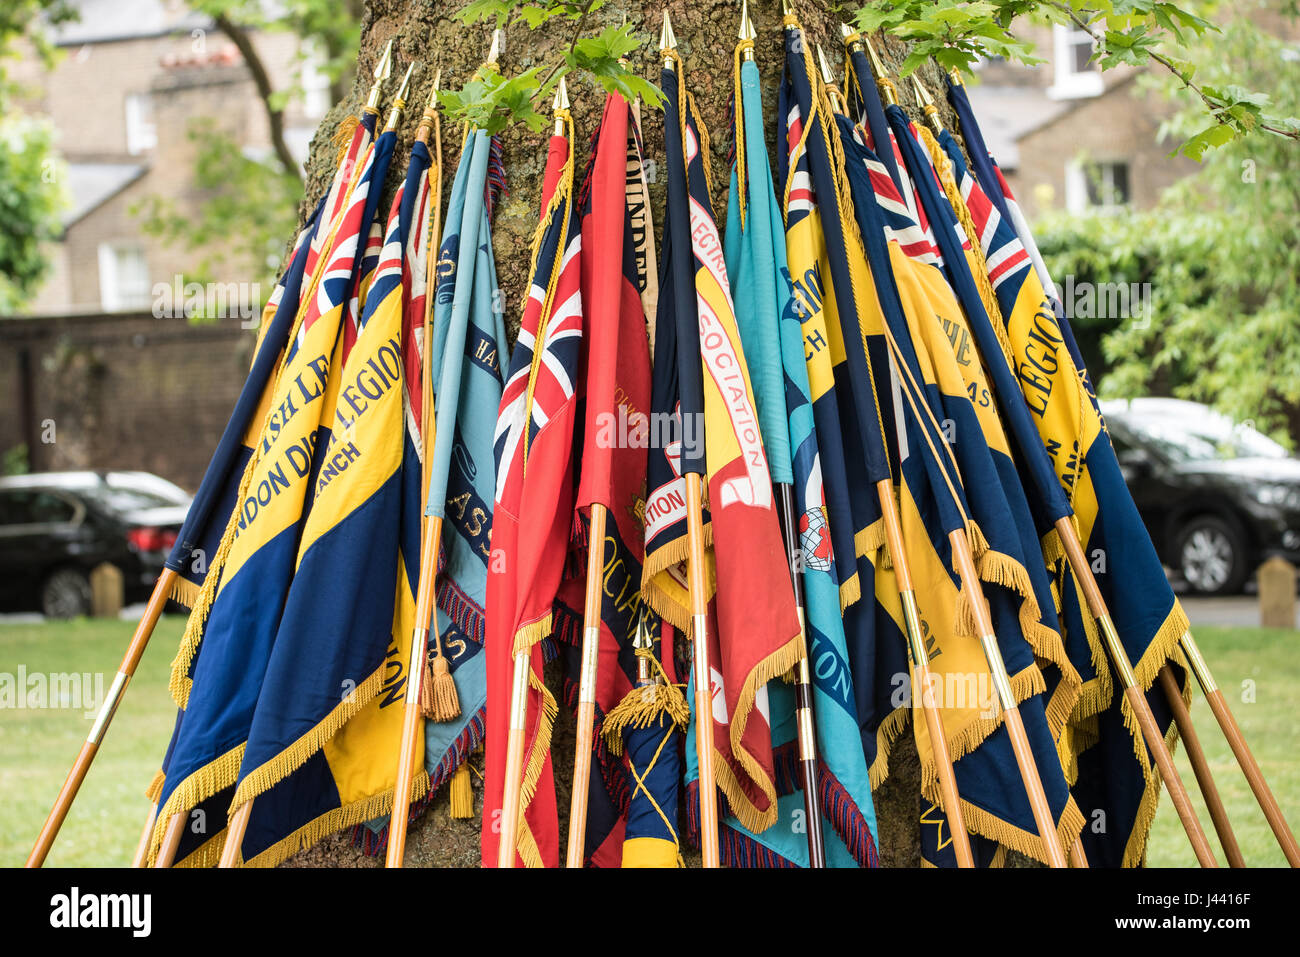 London, UK. 9th May, 2017. Royal British Legion Standards at the Soviet Memorial London, Act of Remembrance marking 72nd anniversary of the allied victory over Fascism Credit: Ian Davidson/Alamy Live News Stock Photo